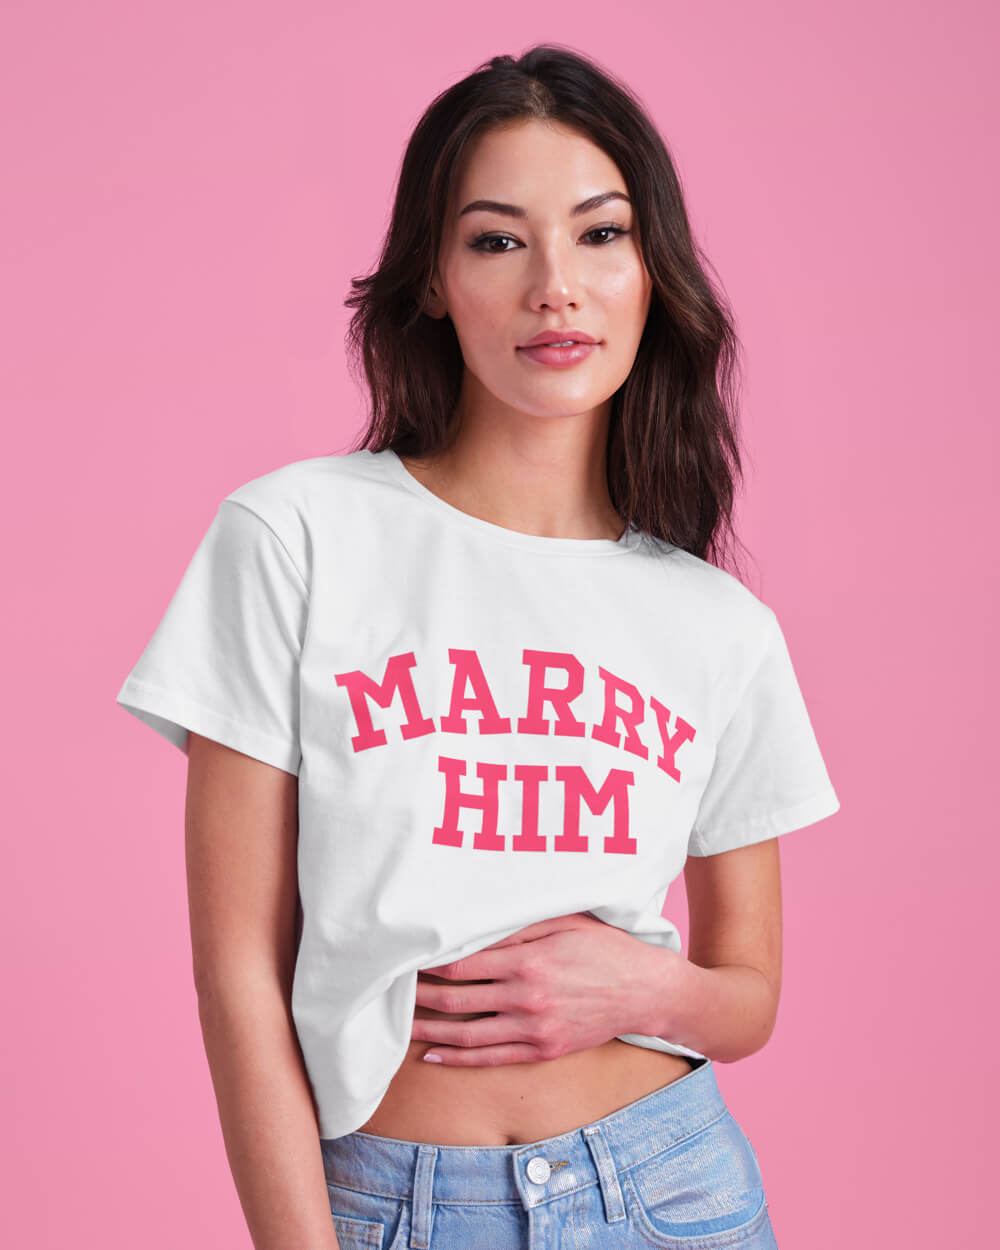 Marry Him Tee - white cotton t-shirt